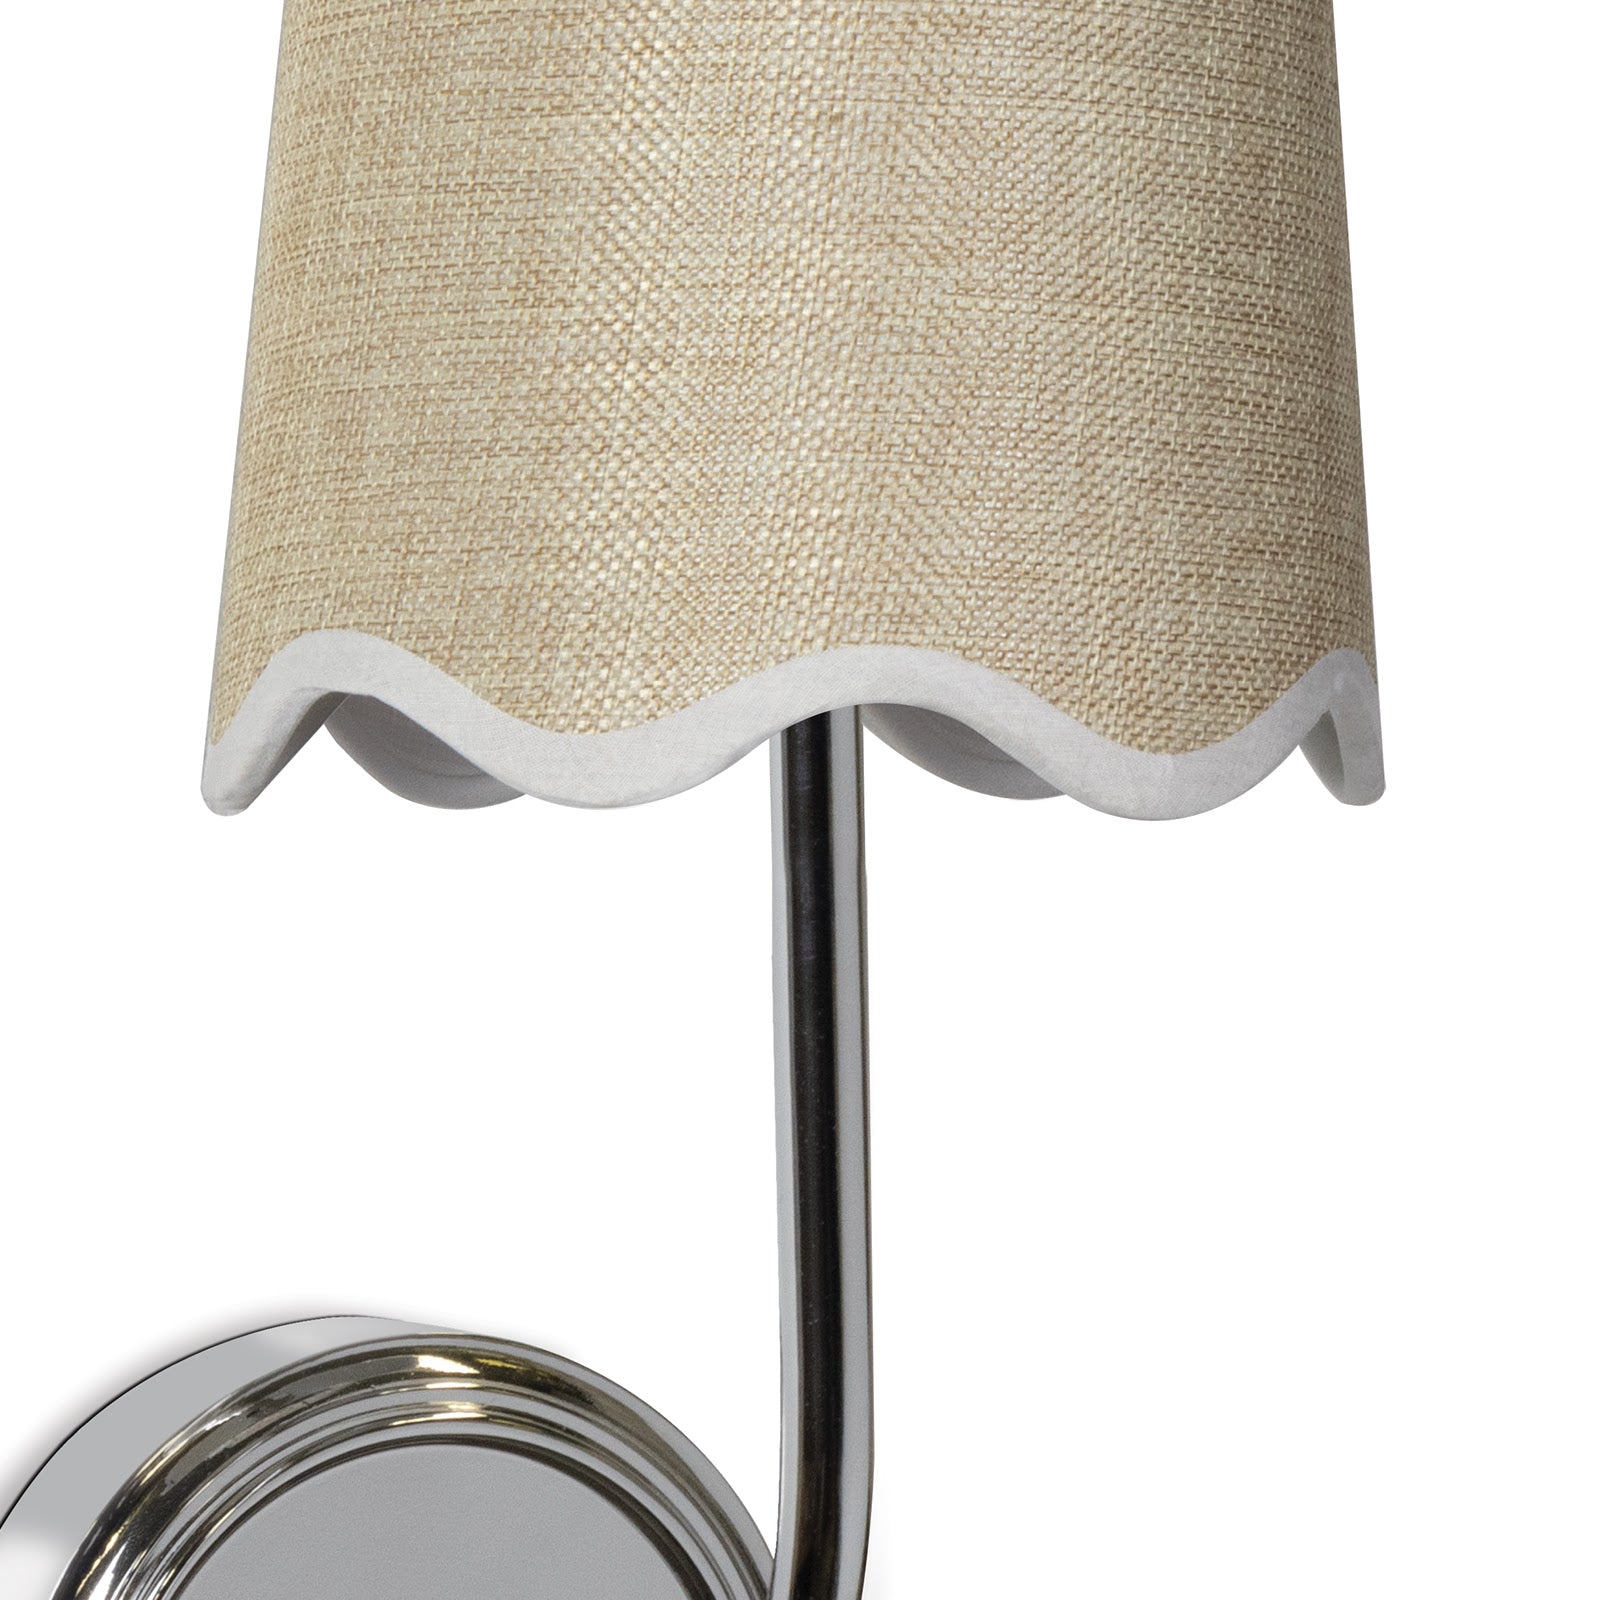 Ariel Sconce in Polished Nickel by Coastal Living